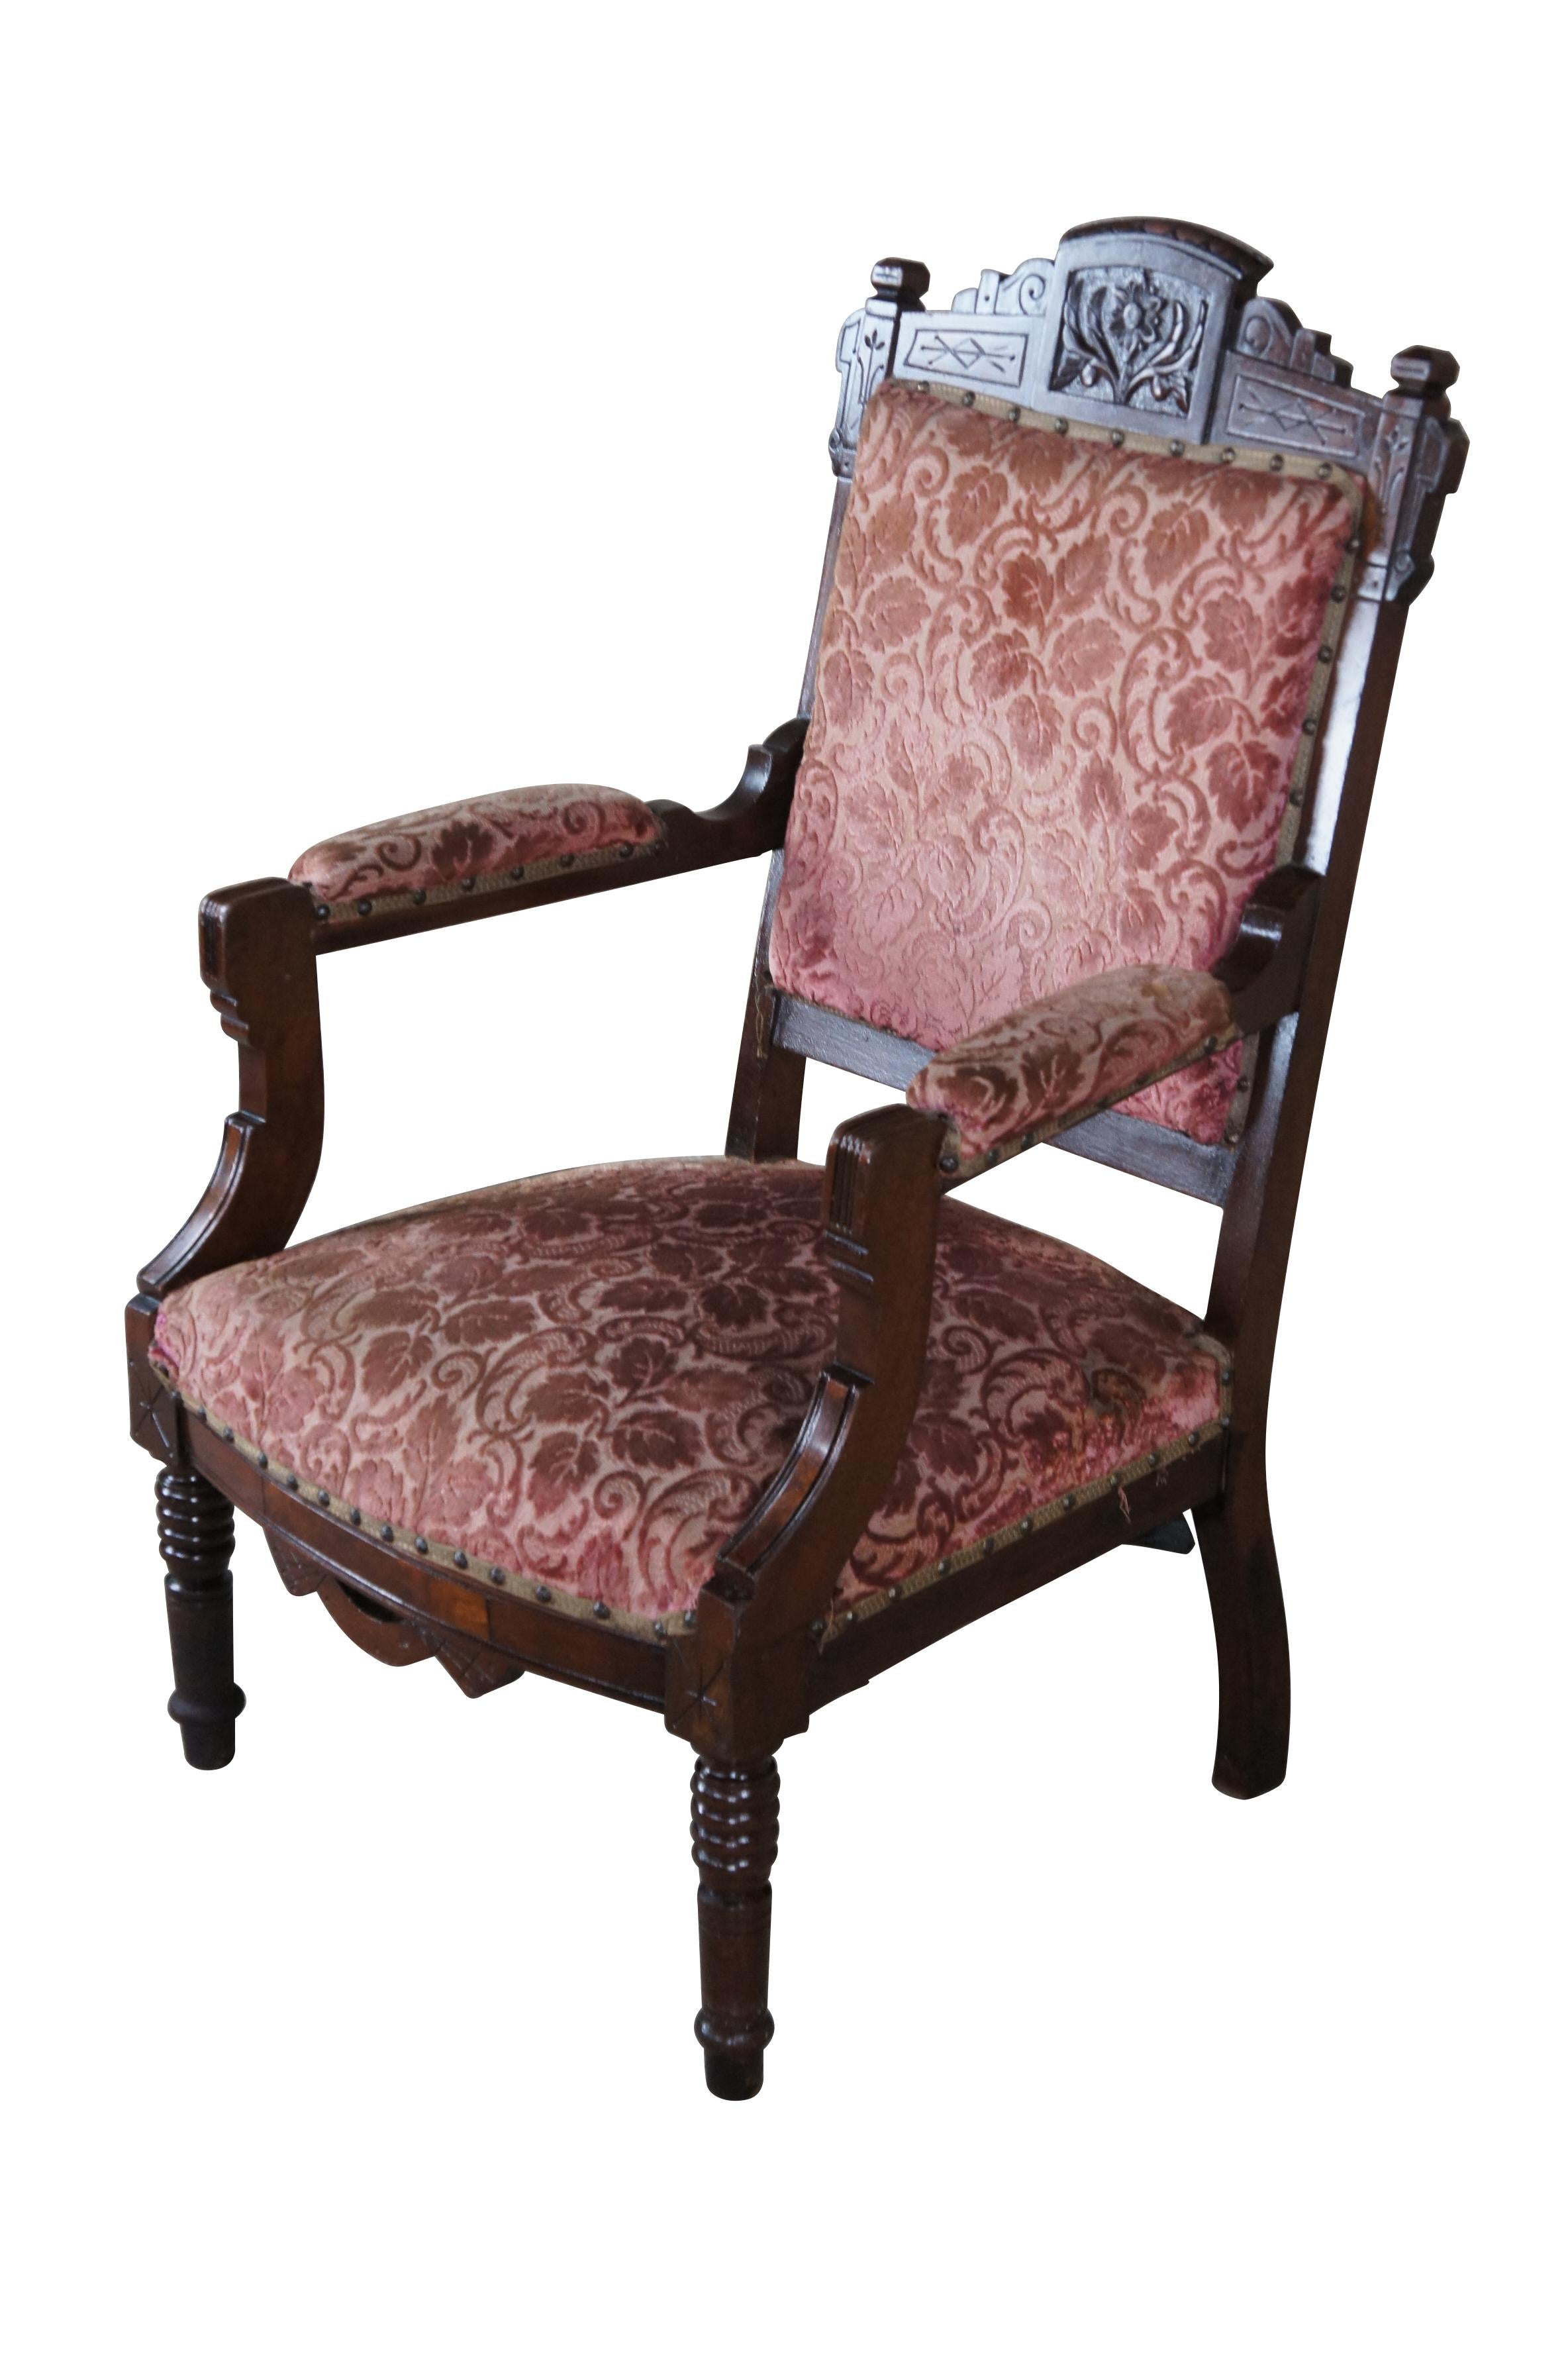 A lovely Victorian arm chair, circa last quarter 20th century.  Features classic Eastlake styling with a scrolled and carved back, padded down swept arms, burled panels and turned ribbed legs.  The chair is upholstered in reddish raised velvet leaf